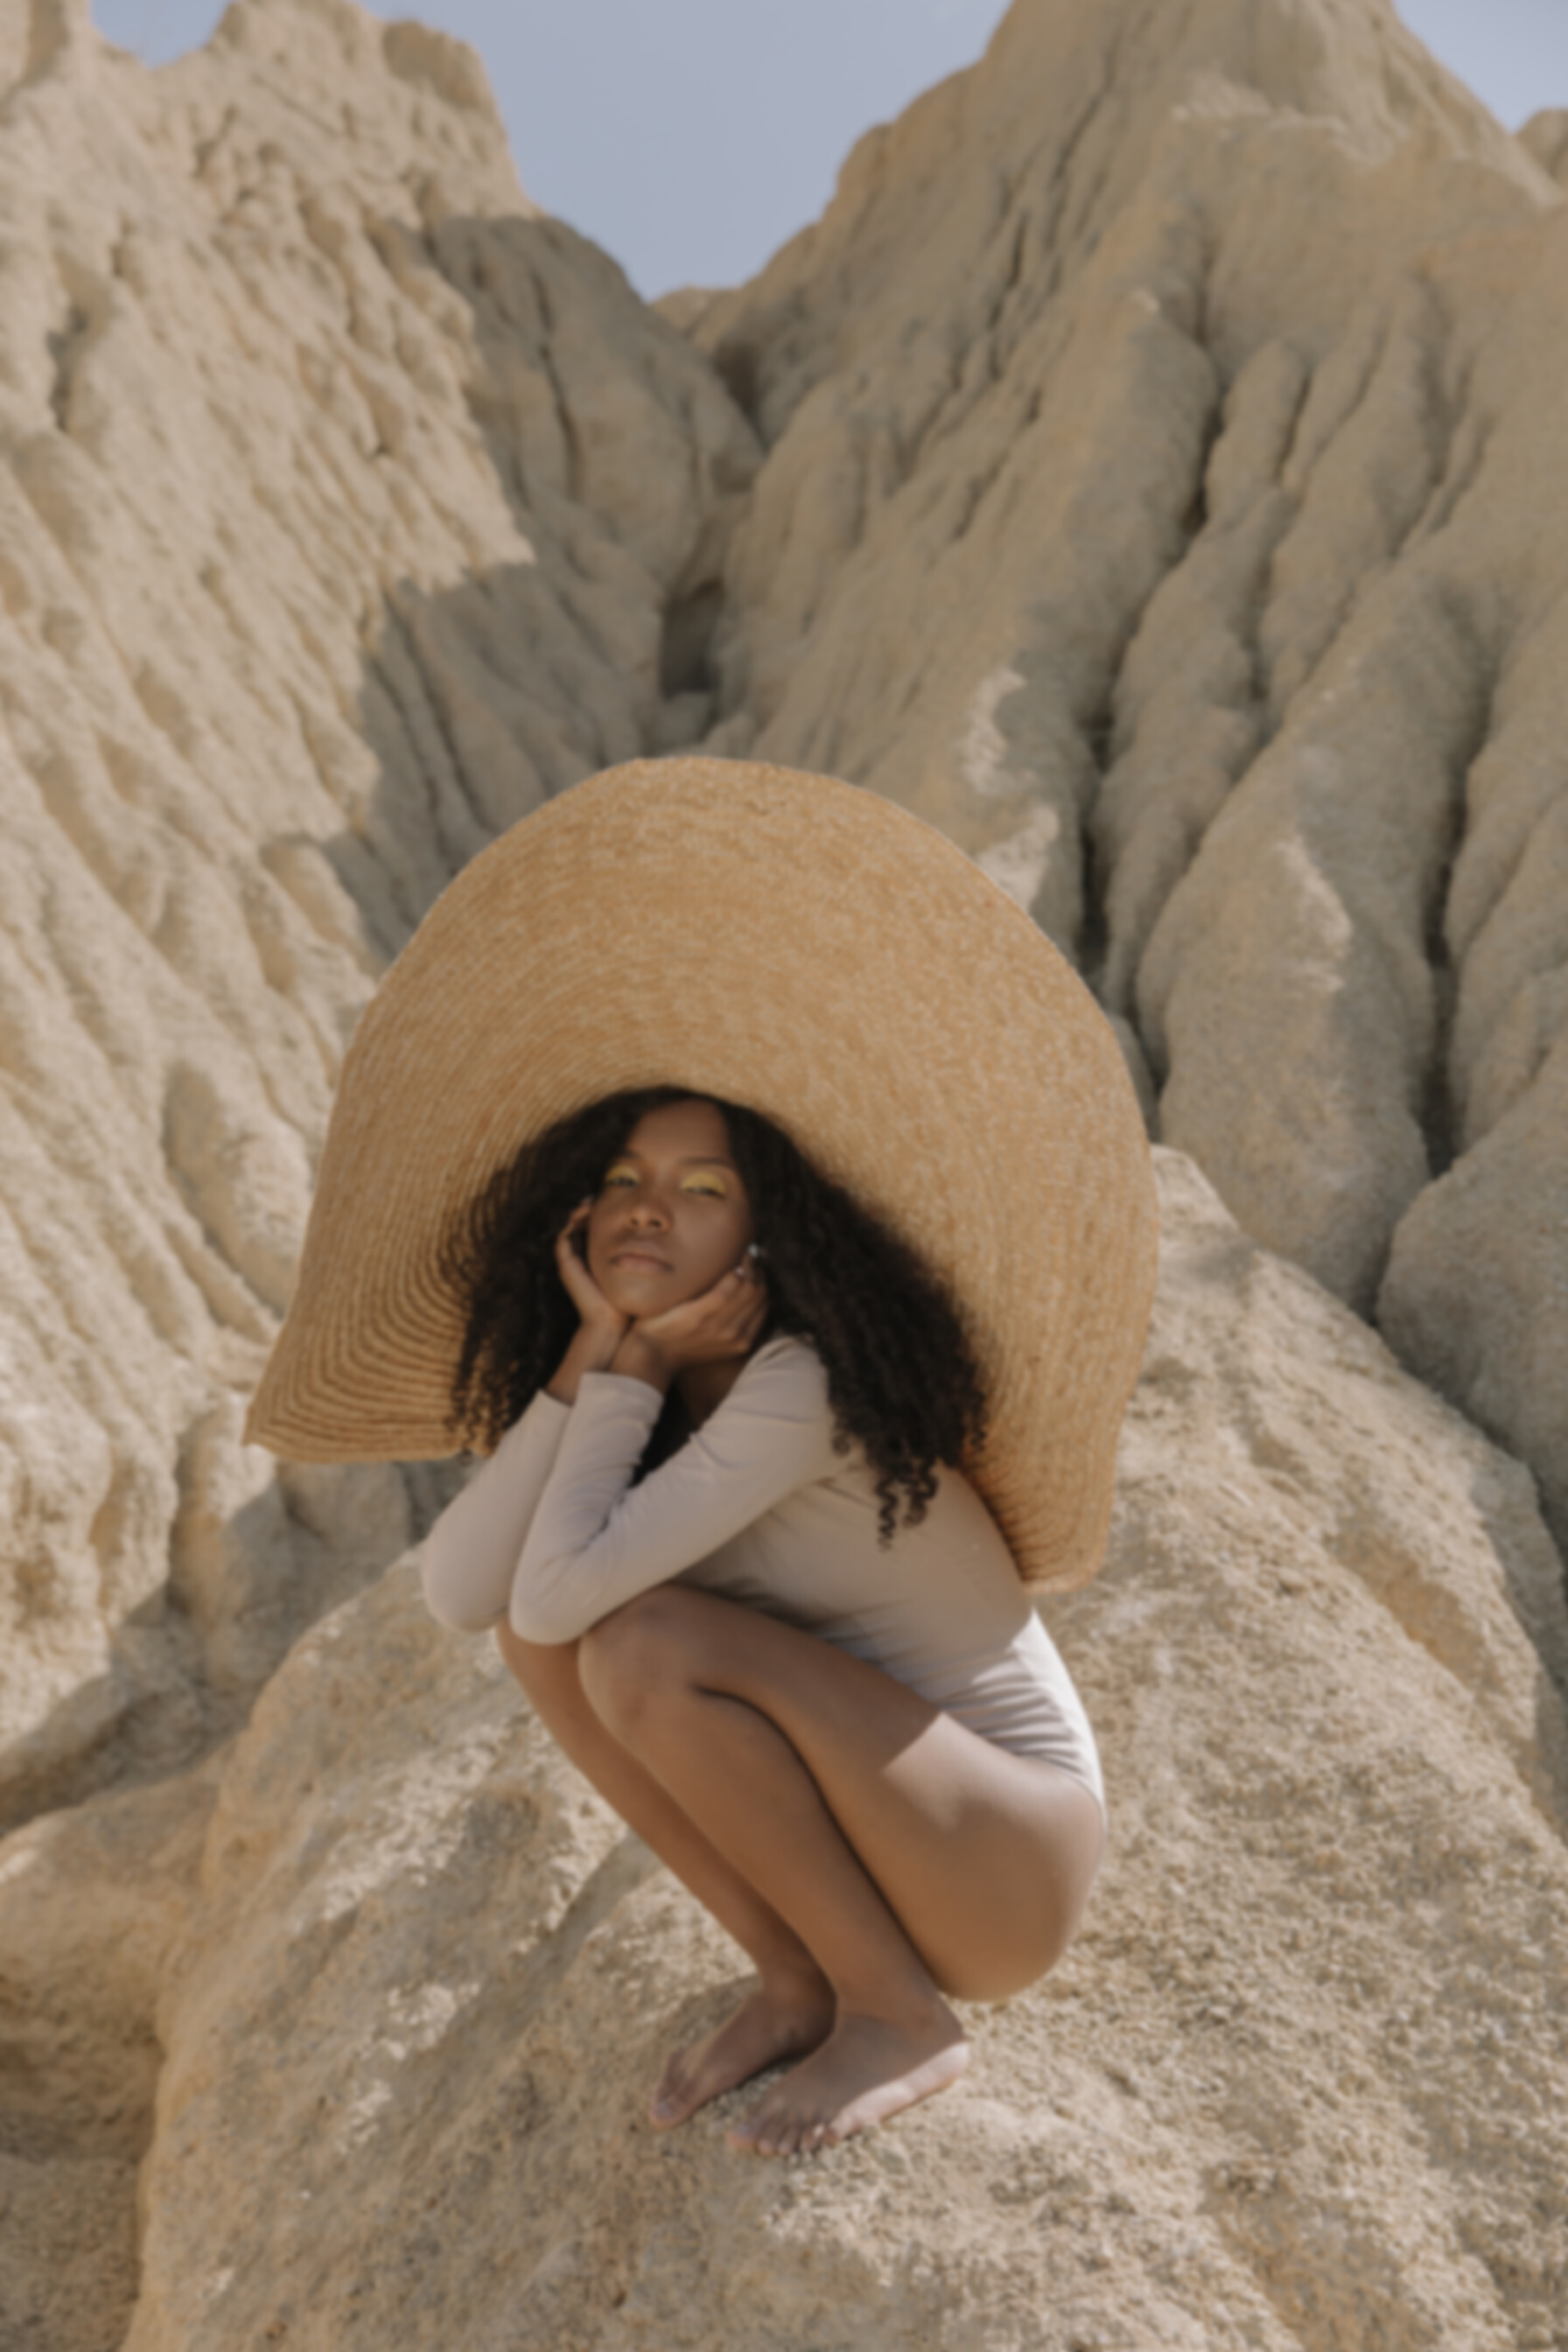 Stylish Young Woman in Beige One-piece and a Big Sunhat 